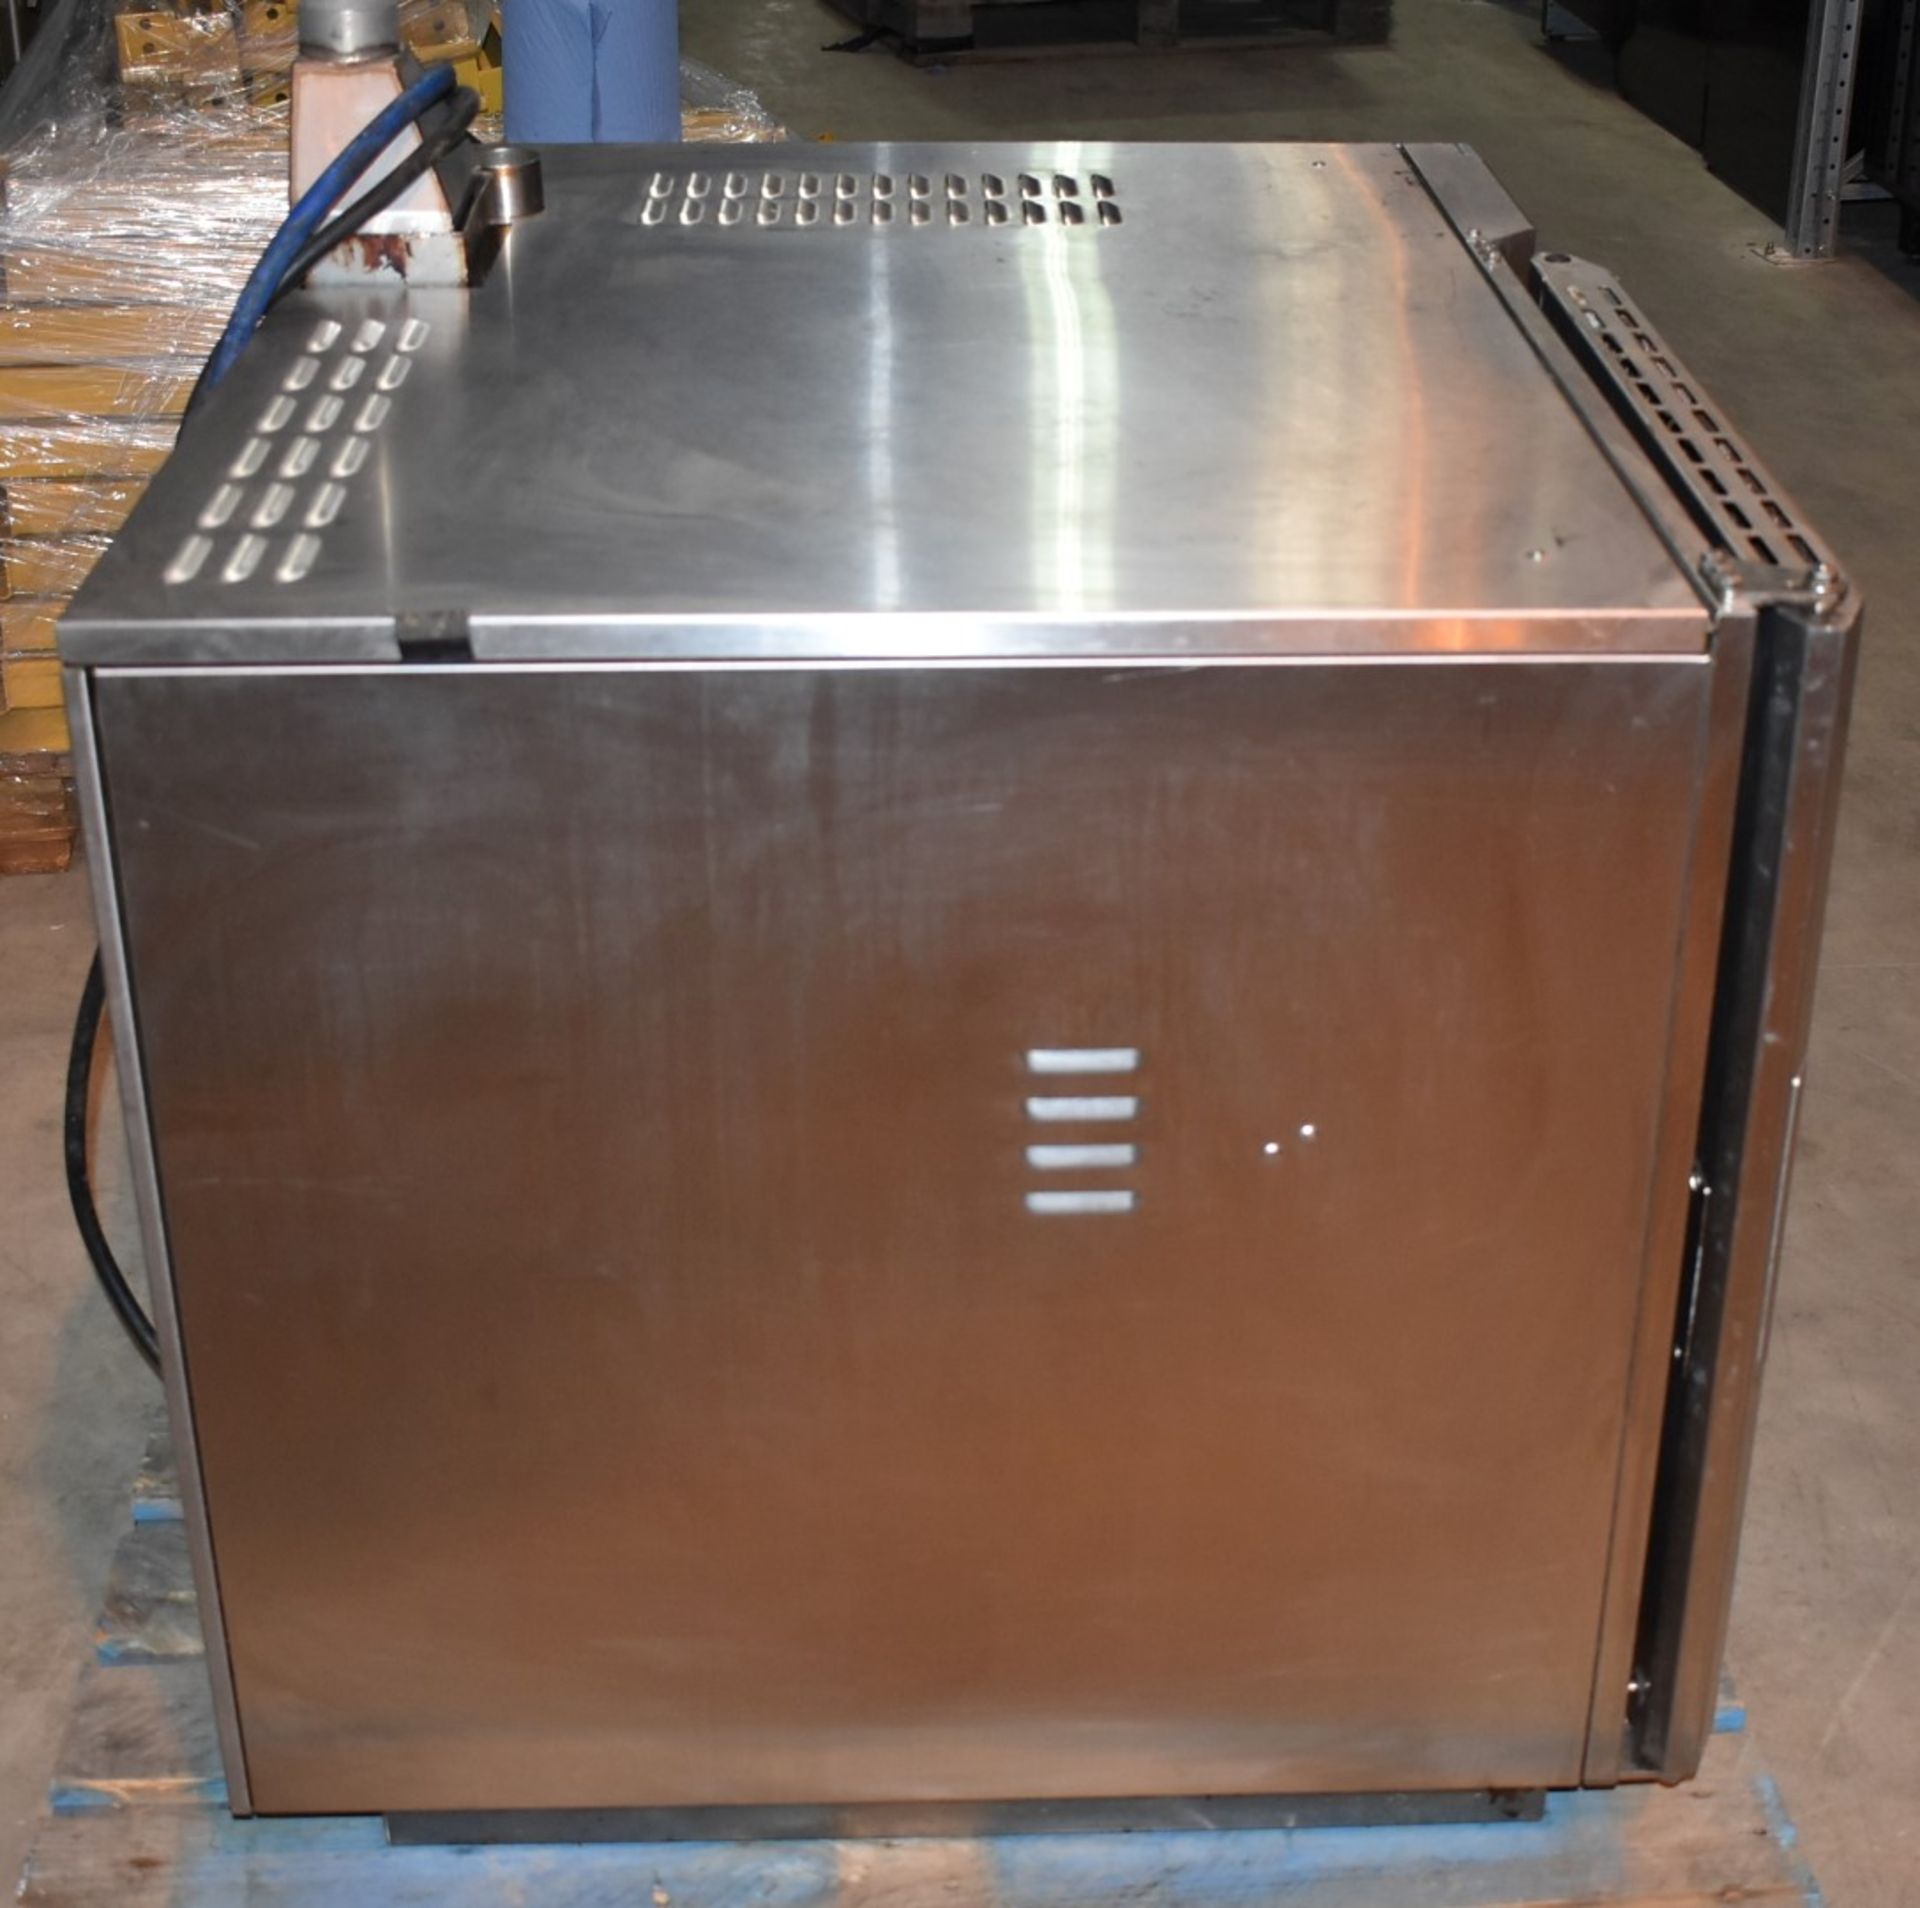 1 x Leventi Combimat mk3.1 Mastermind 6 Grid Combi Steam Oven - 3 Phase - Recently Removed From a - Image 11 of 11